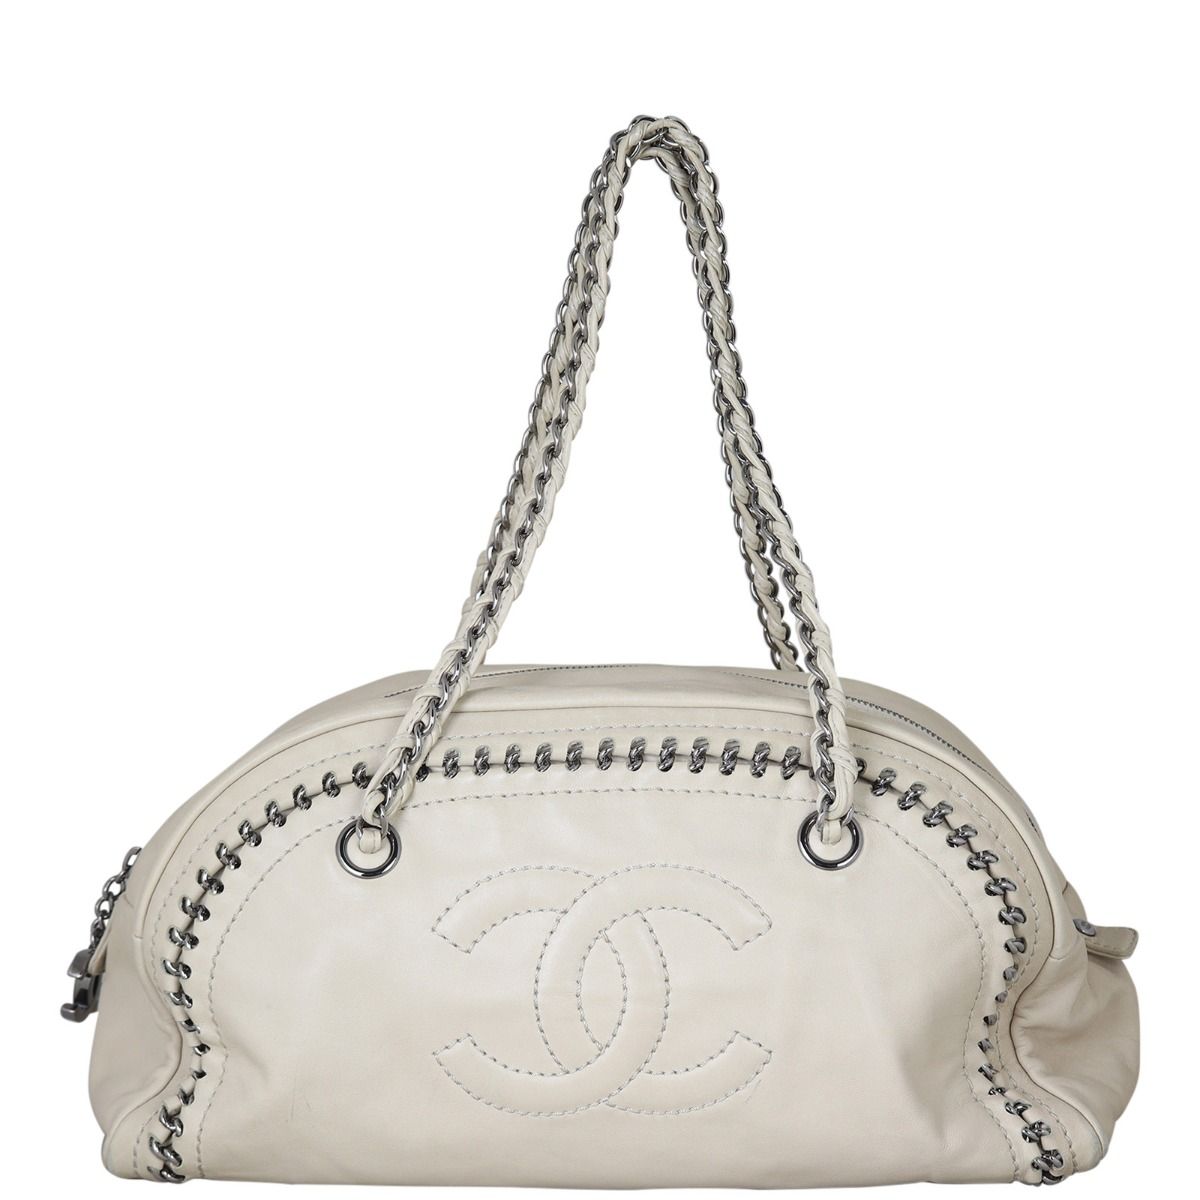 Chanel Luxe Ligne Bowler